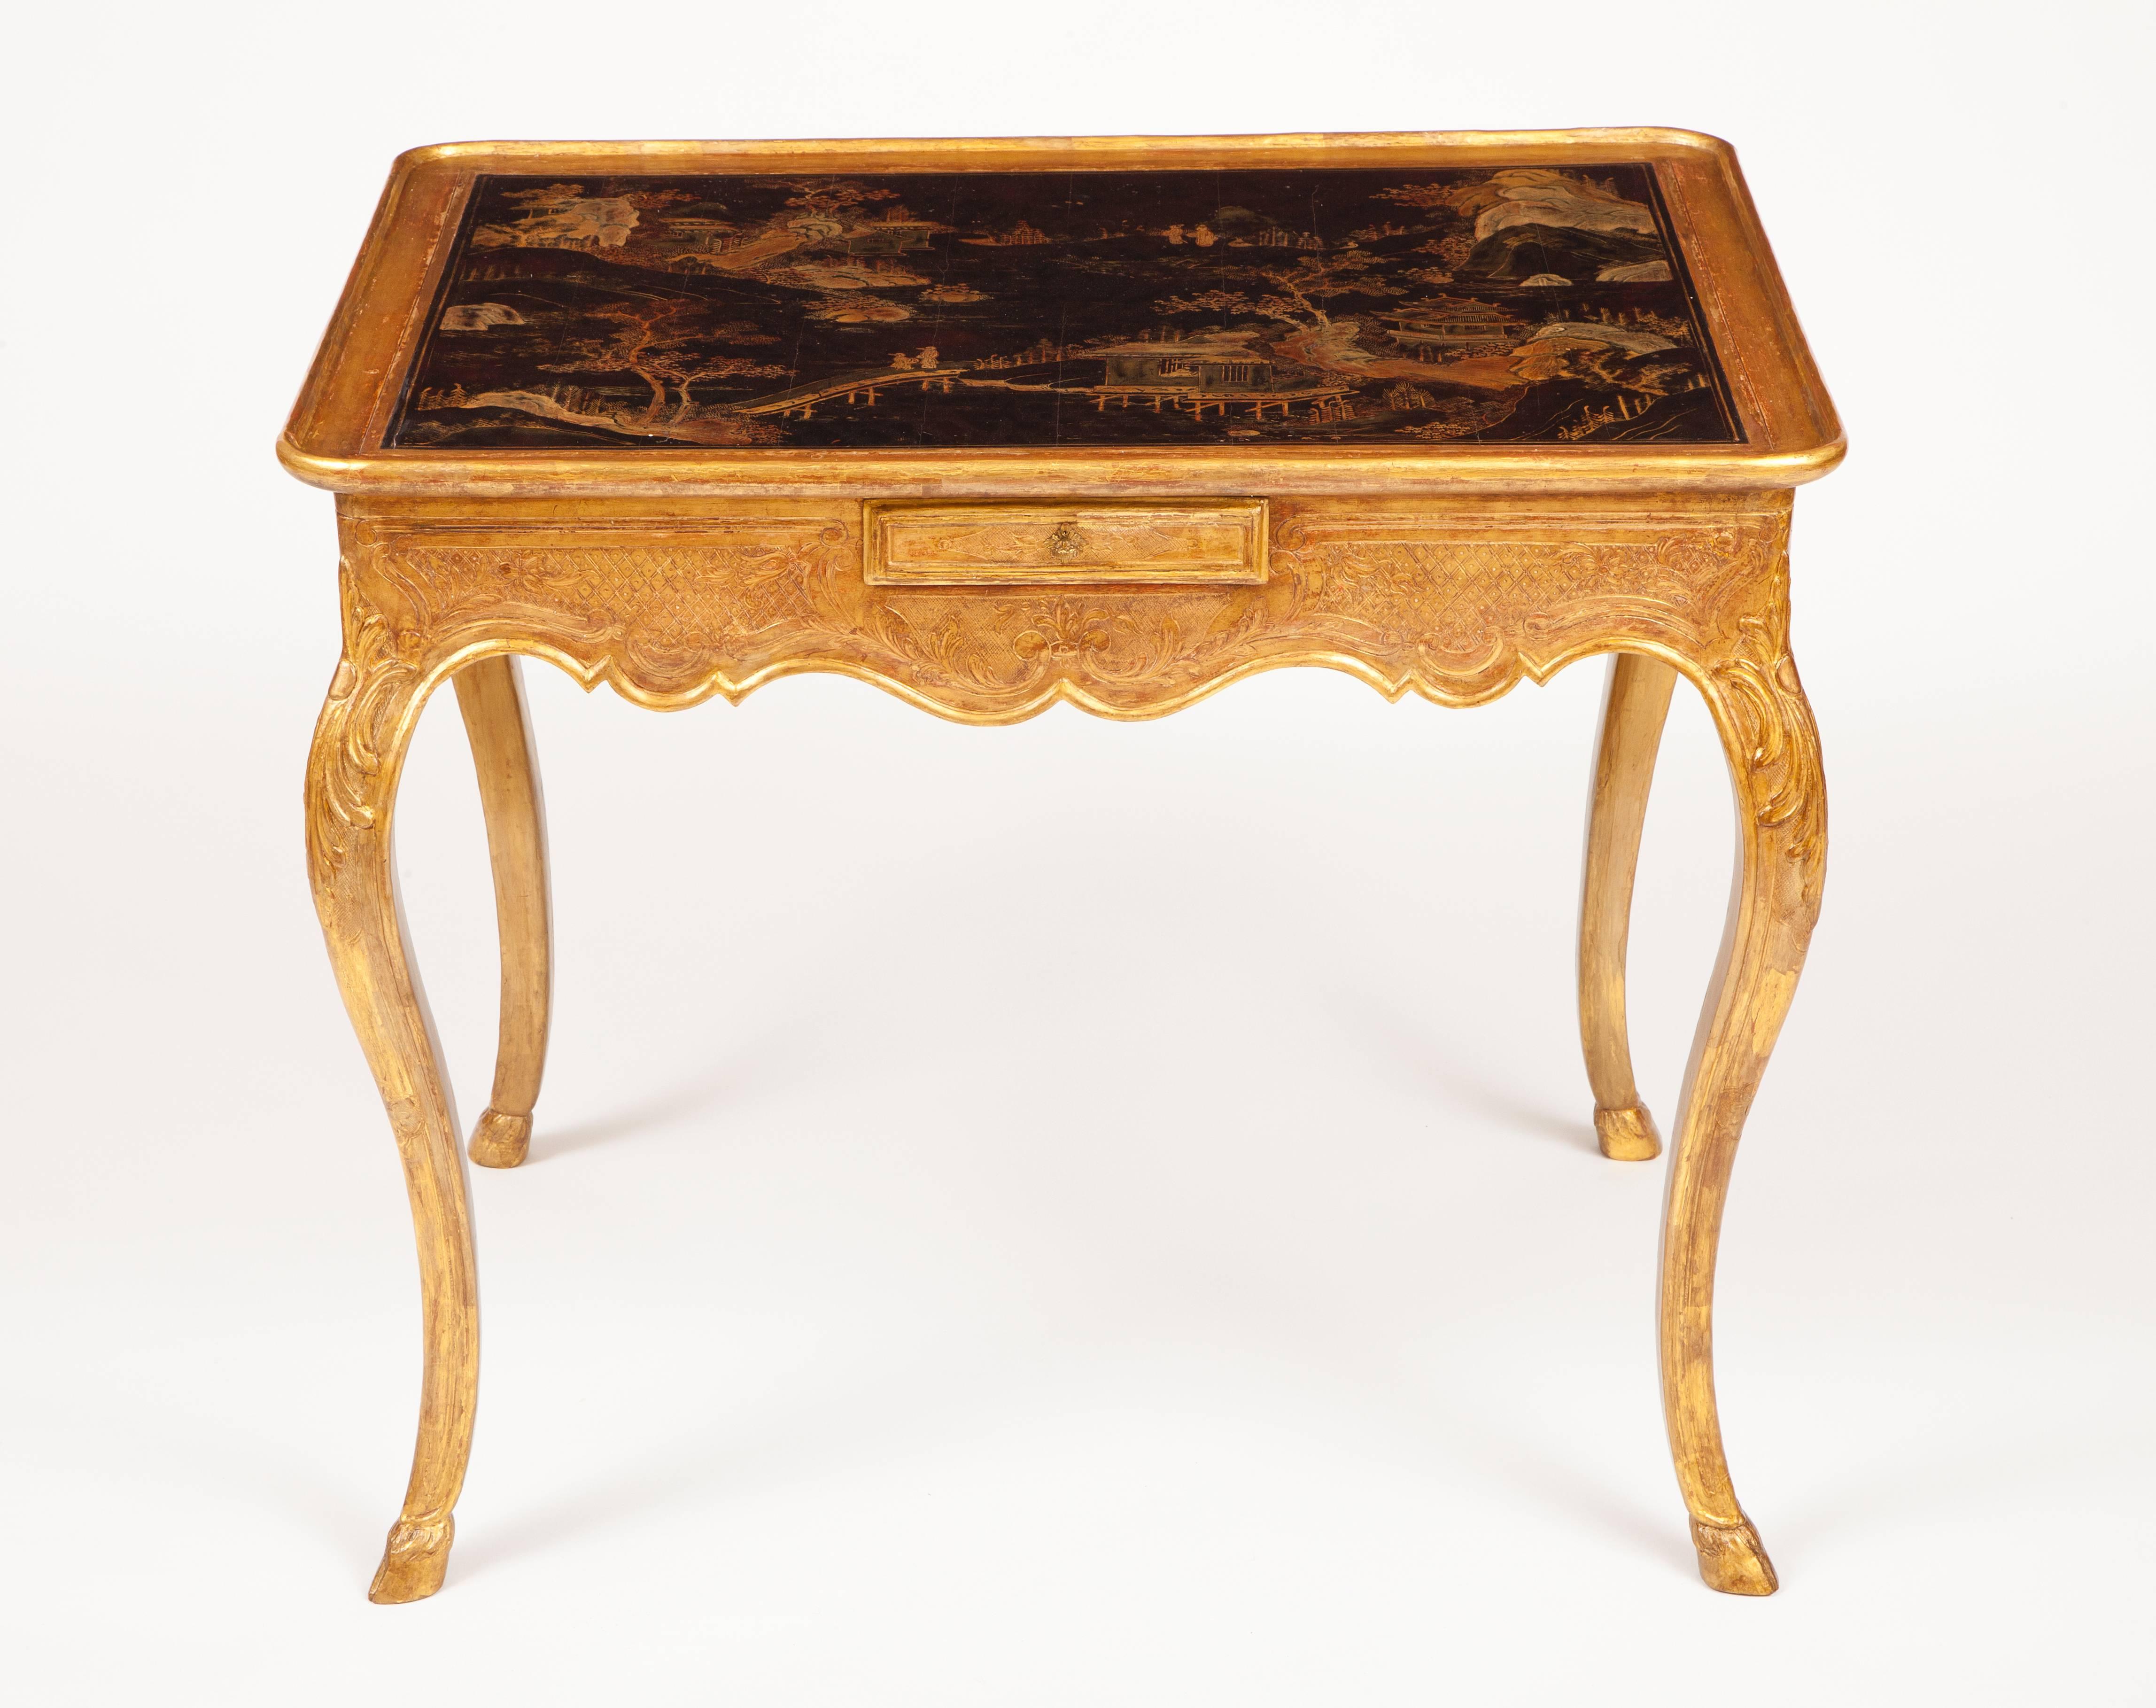 This very fine French early Louis XV period table with its lacquered tray-form top with chinoiserie scenes above carved and gilded base with cabriole legs ending in hoof feet, is described as a table en cabaret, used in the period to serve coffee